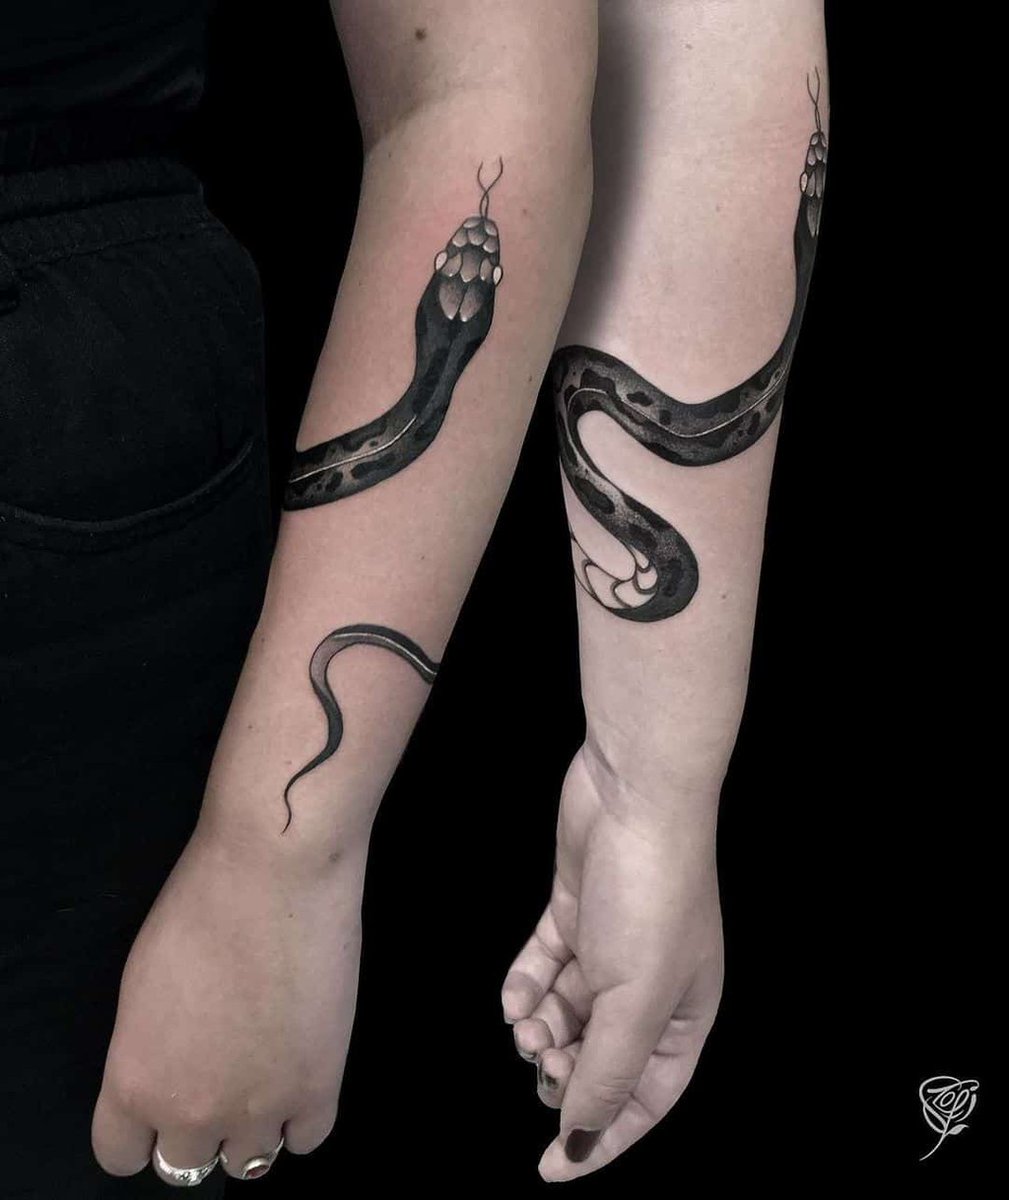 Matching snake and sword tattoo for couple.